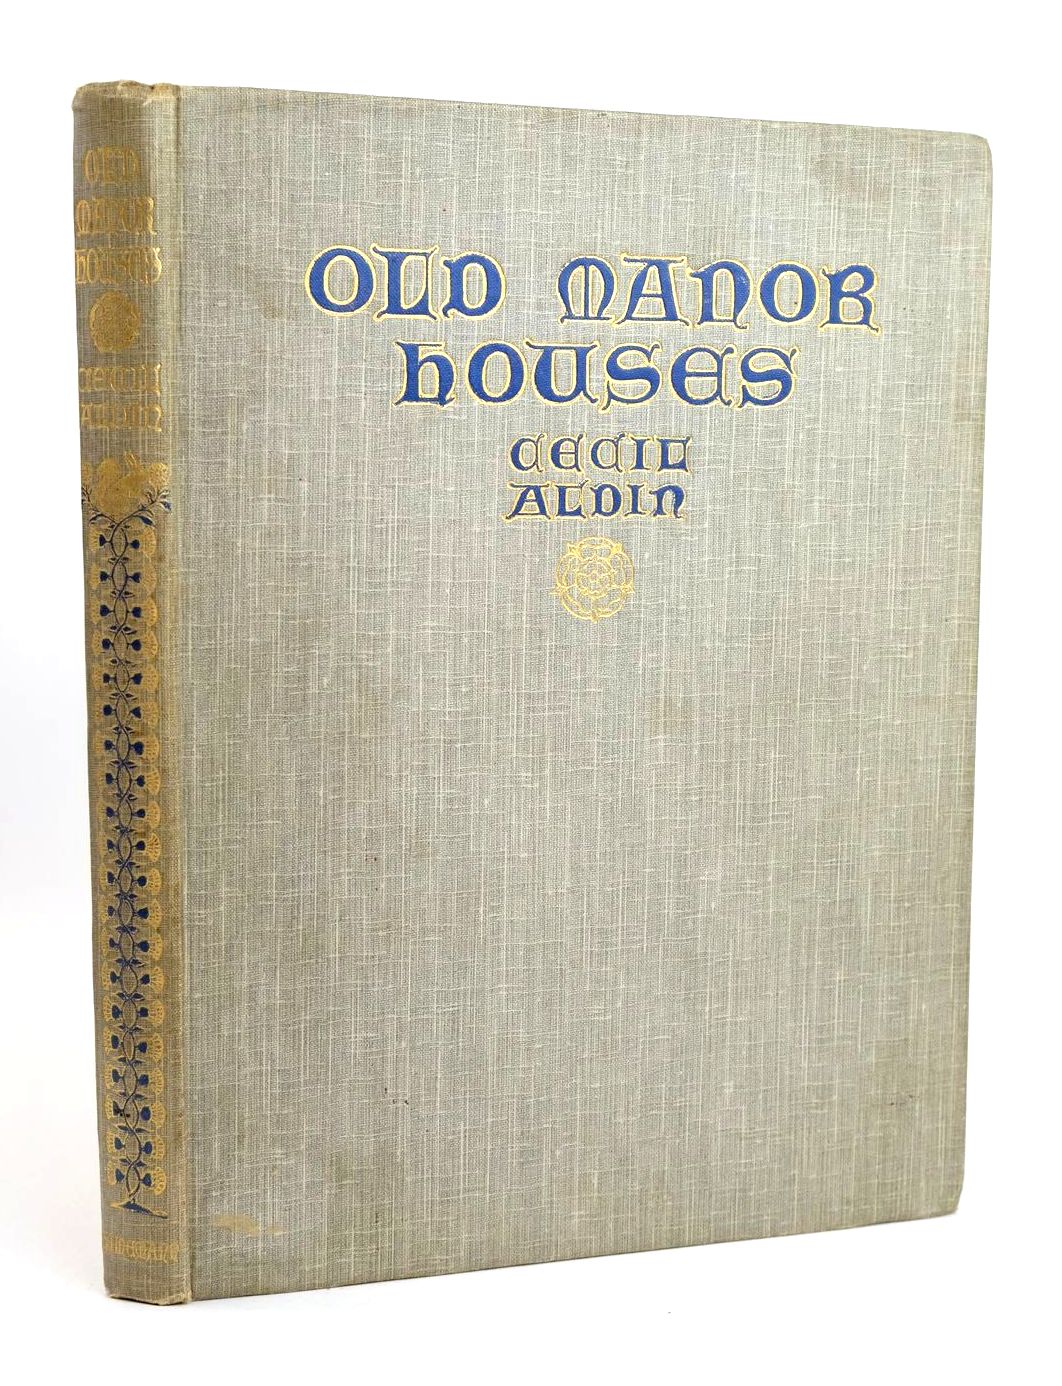 Photo of OLD MANOR HOUSES written by Aldin, Cecil illustrated by Aldin, Cecil published by William Heinemann Ltd. (STOCK CODE: 1319359)  for sale by Stella & Rose's Books